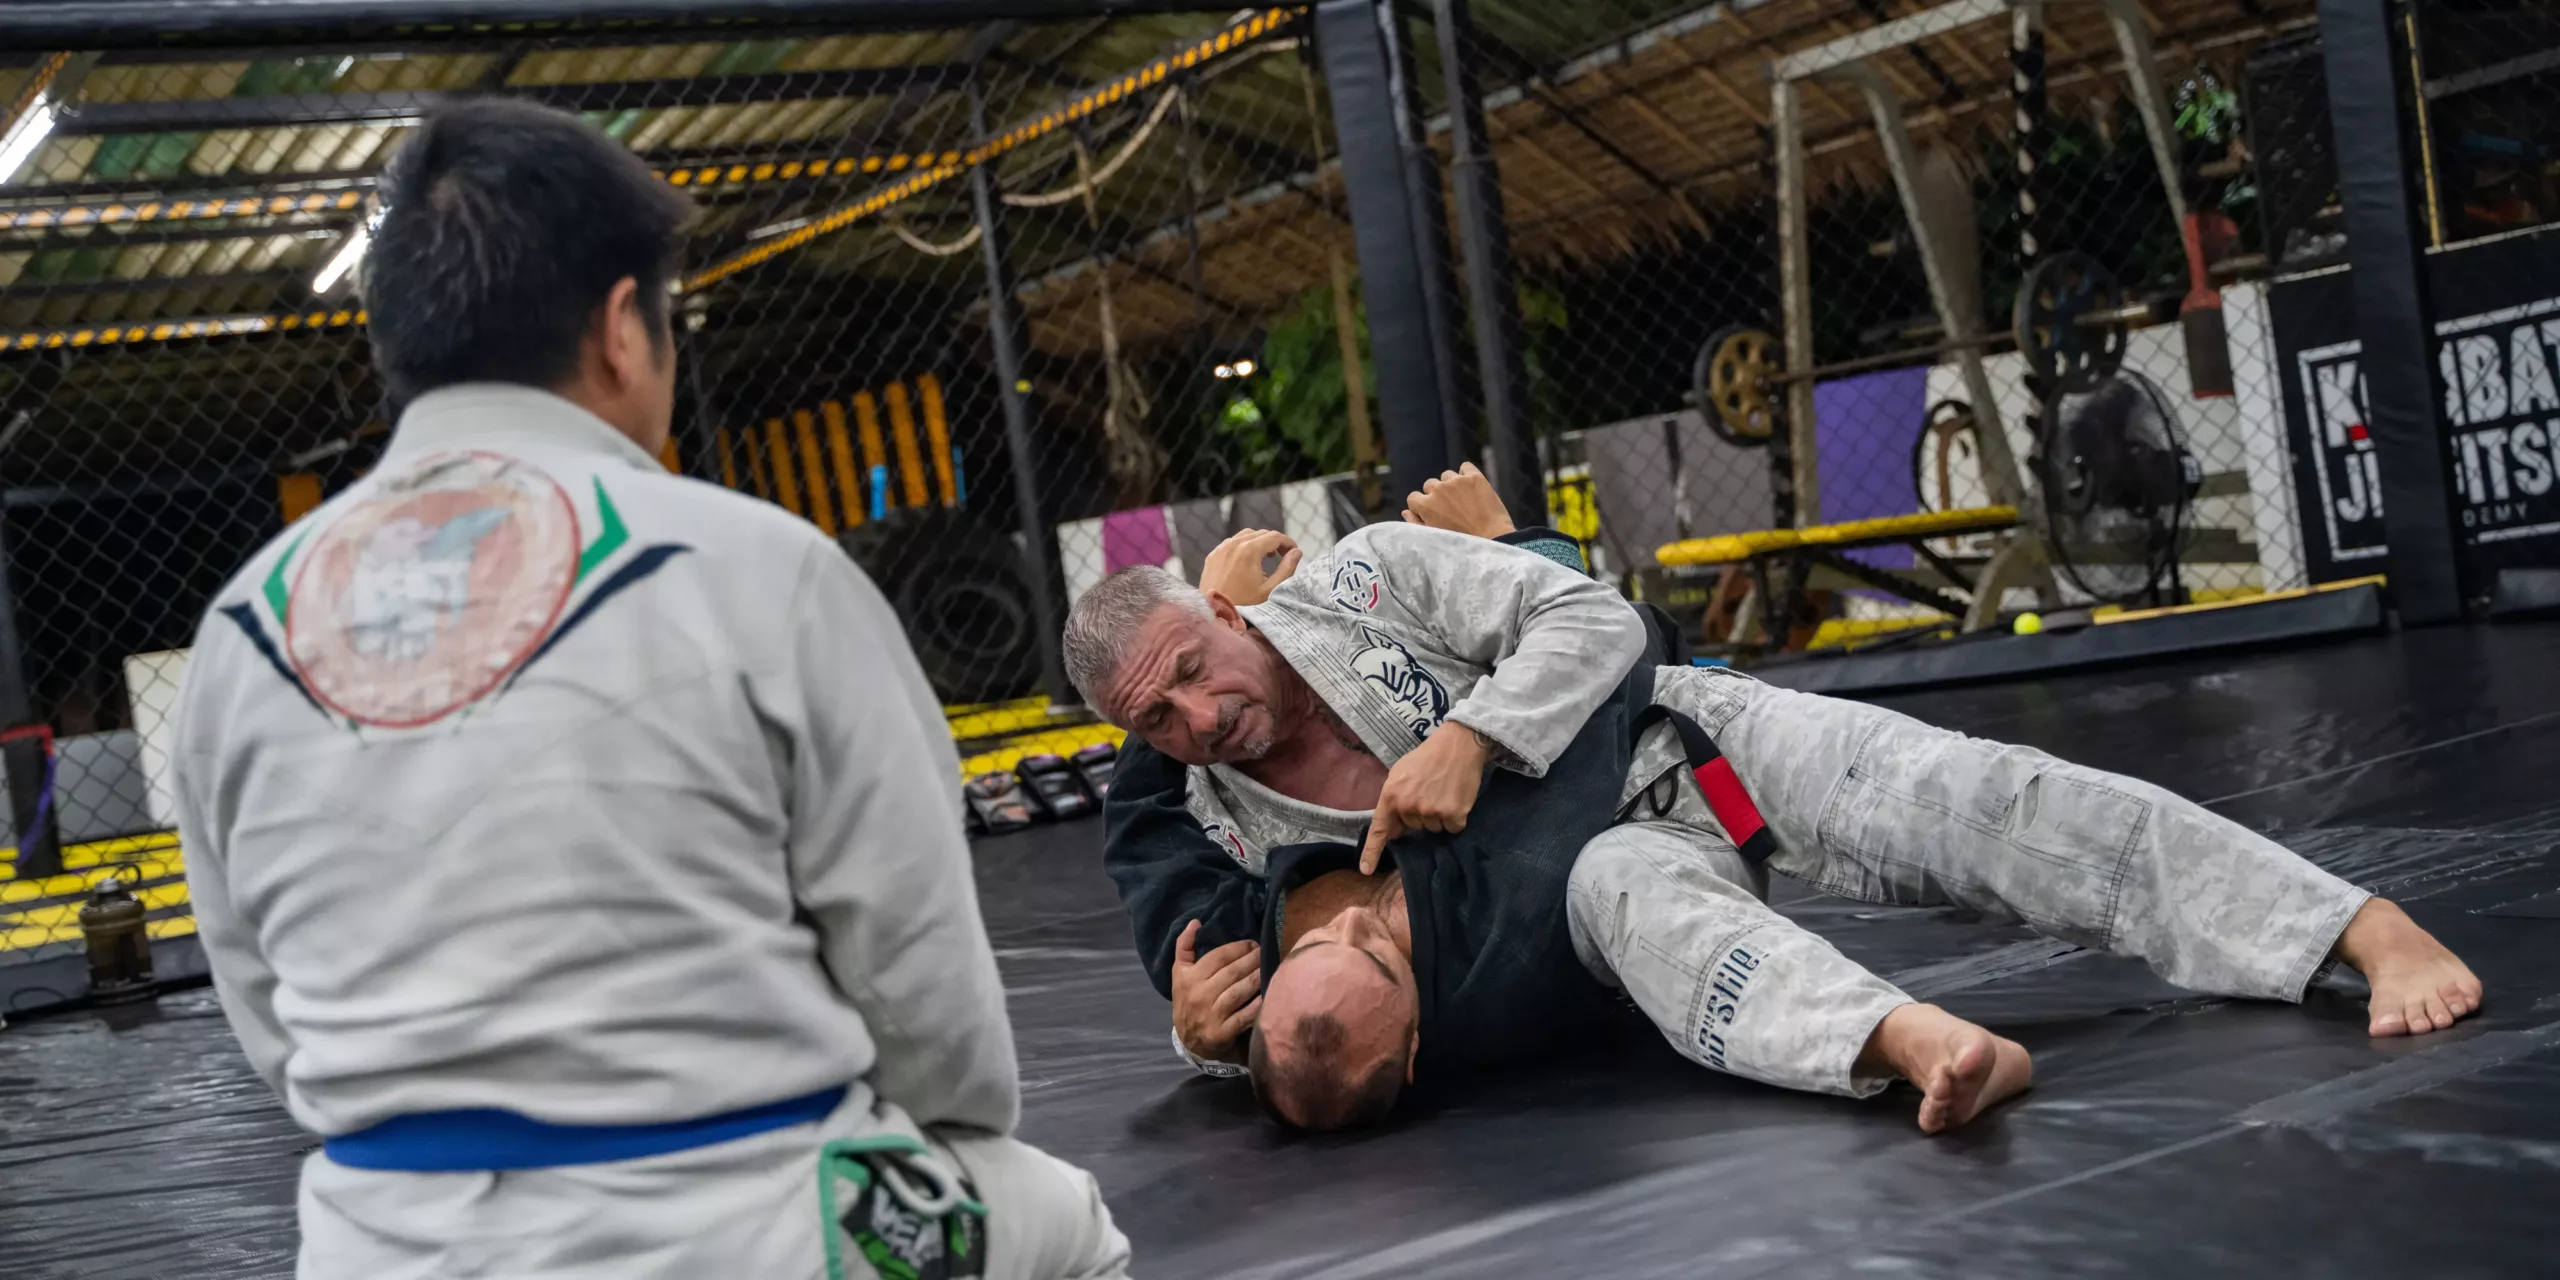 A Brazilian Jiu-Jitsu student attempts to escape a tight side control by an experienced practitioner in a grey gi, while another looks on, in a focused and realistic rolling session on the mats.